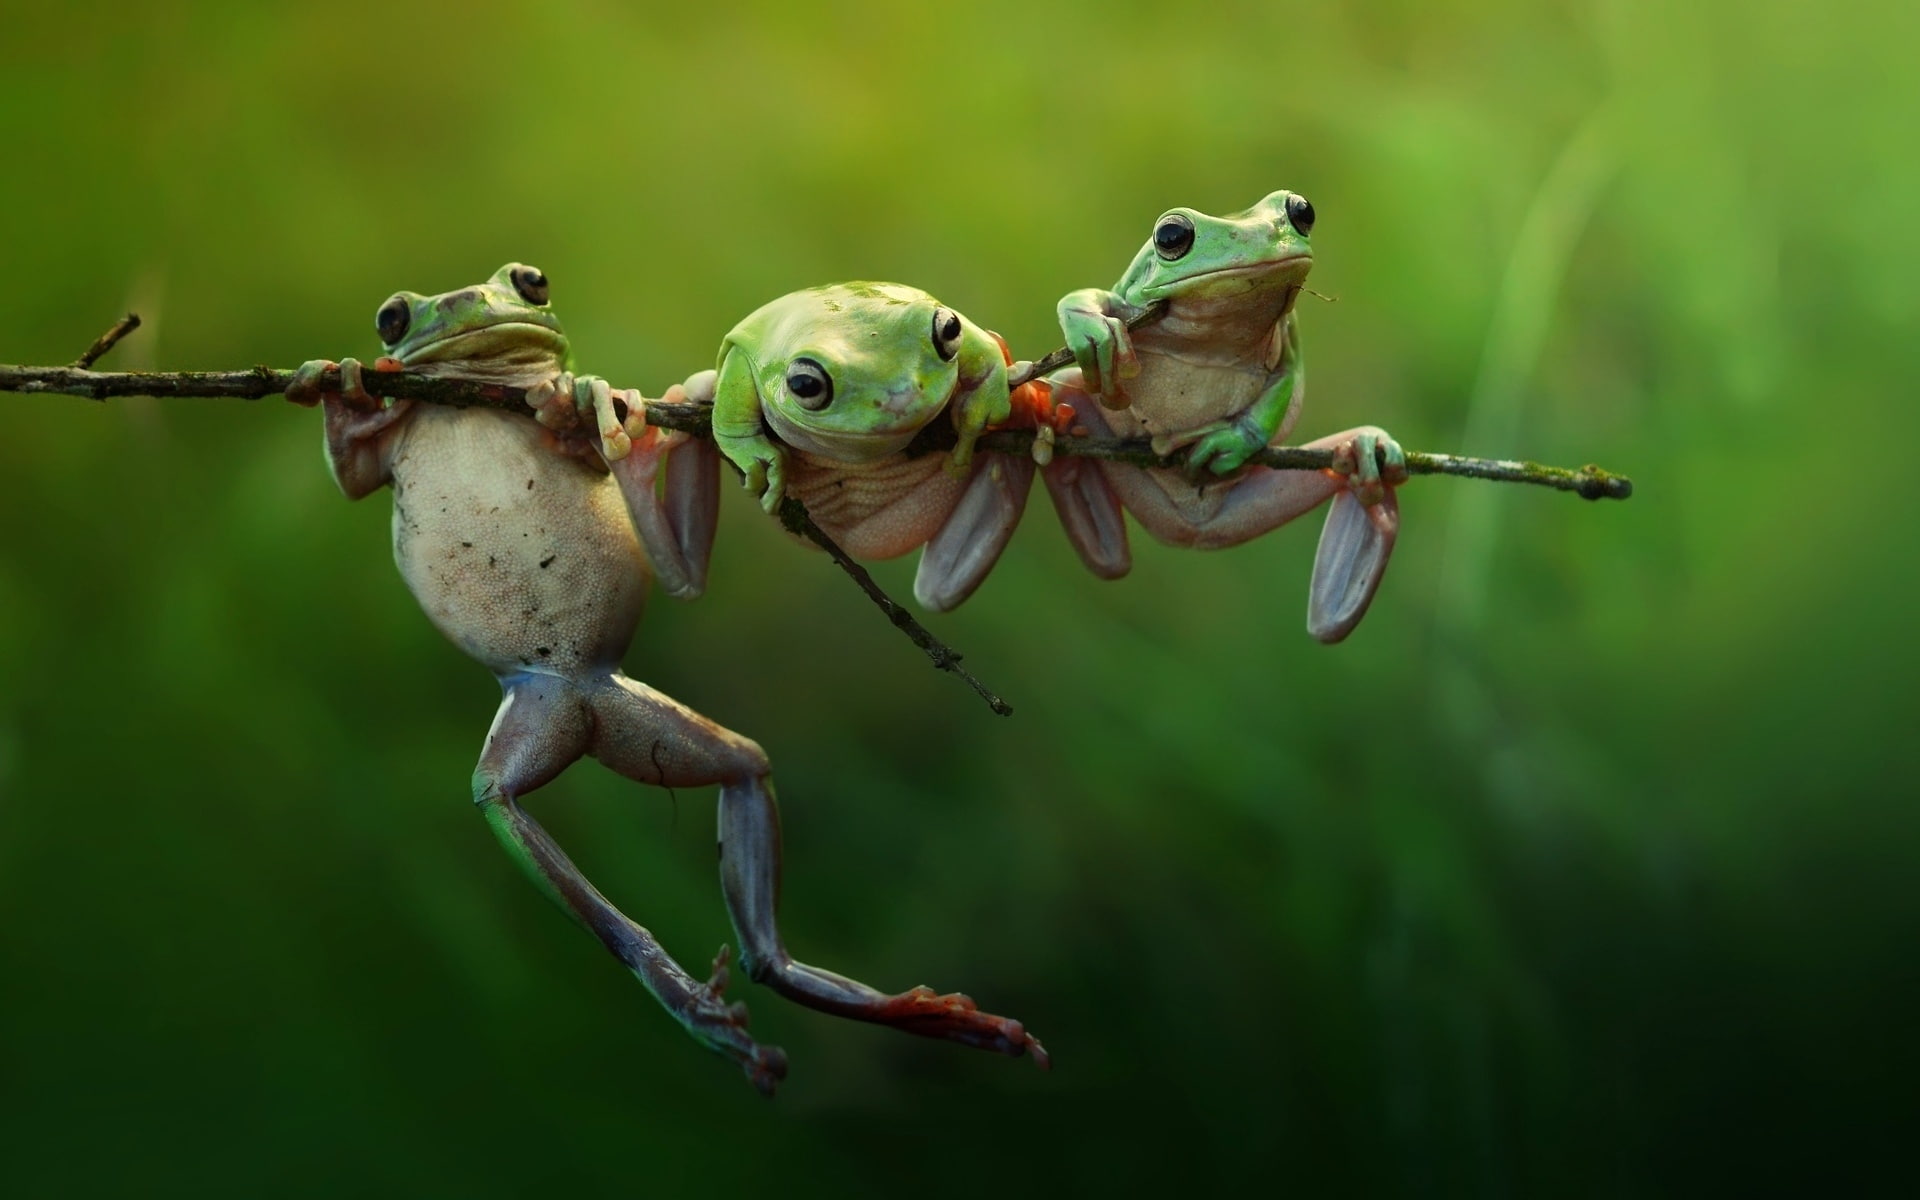 Three Frogs on a Branch